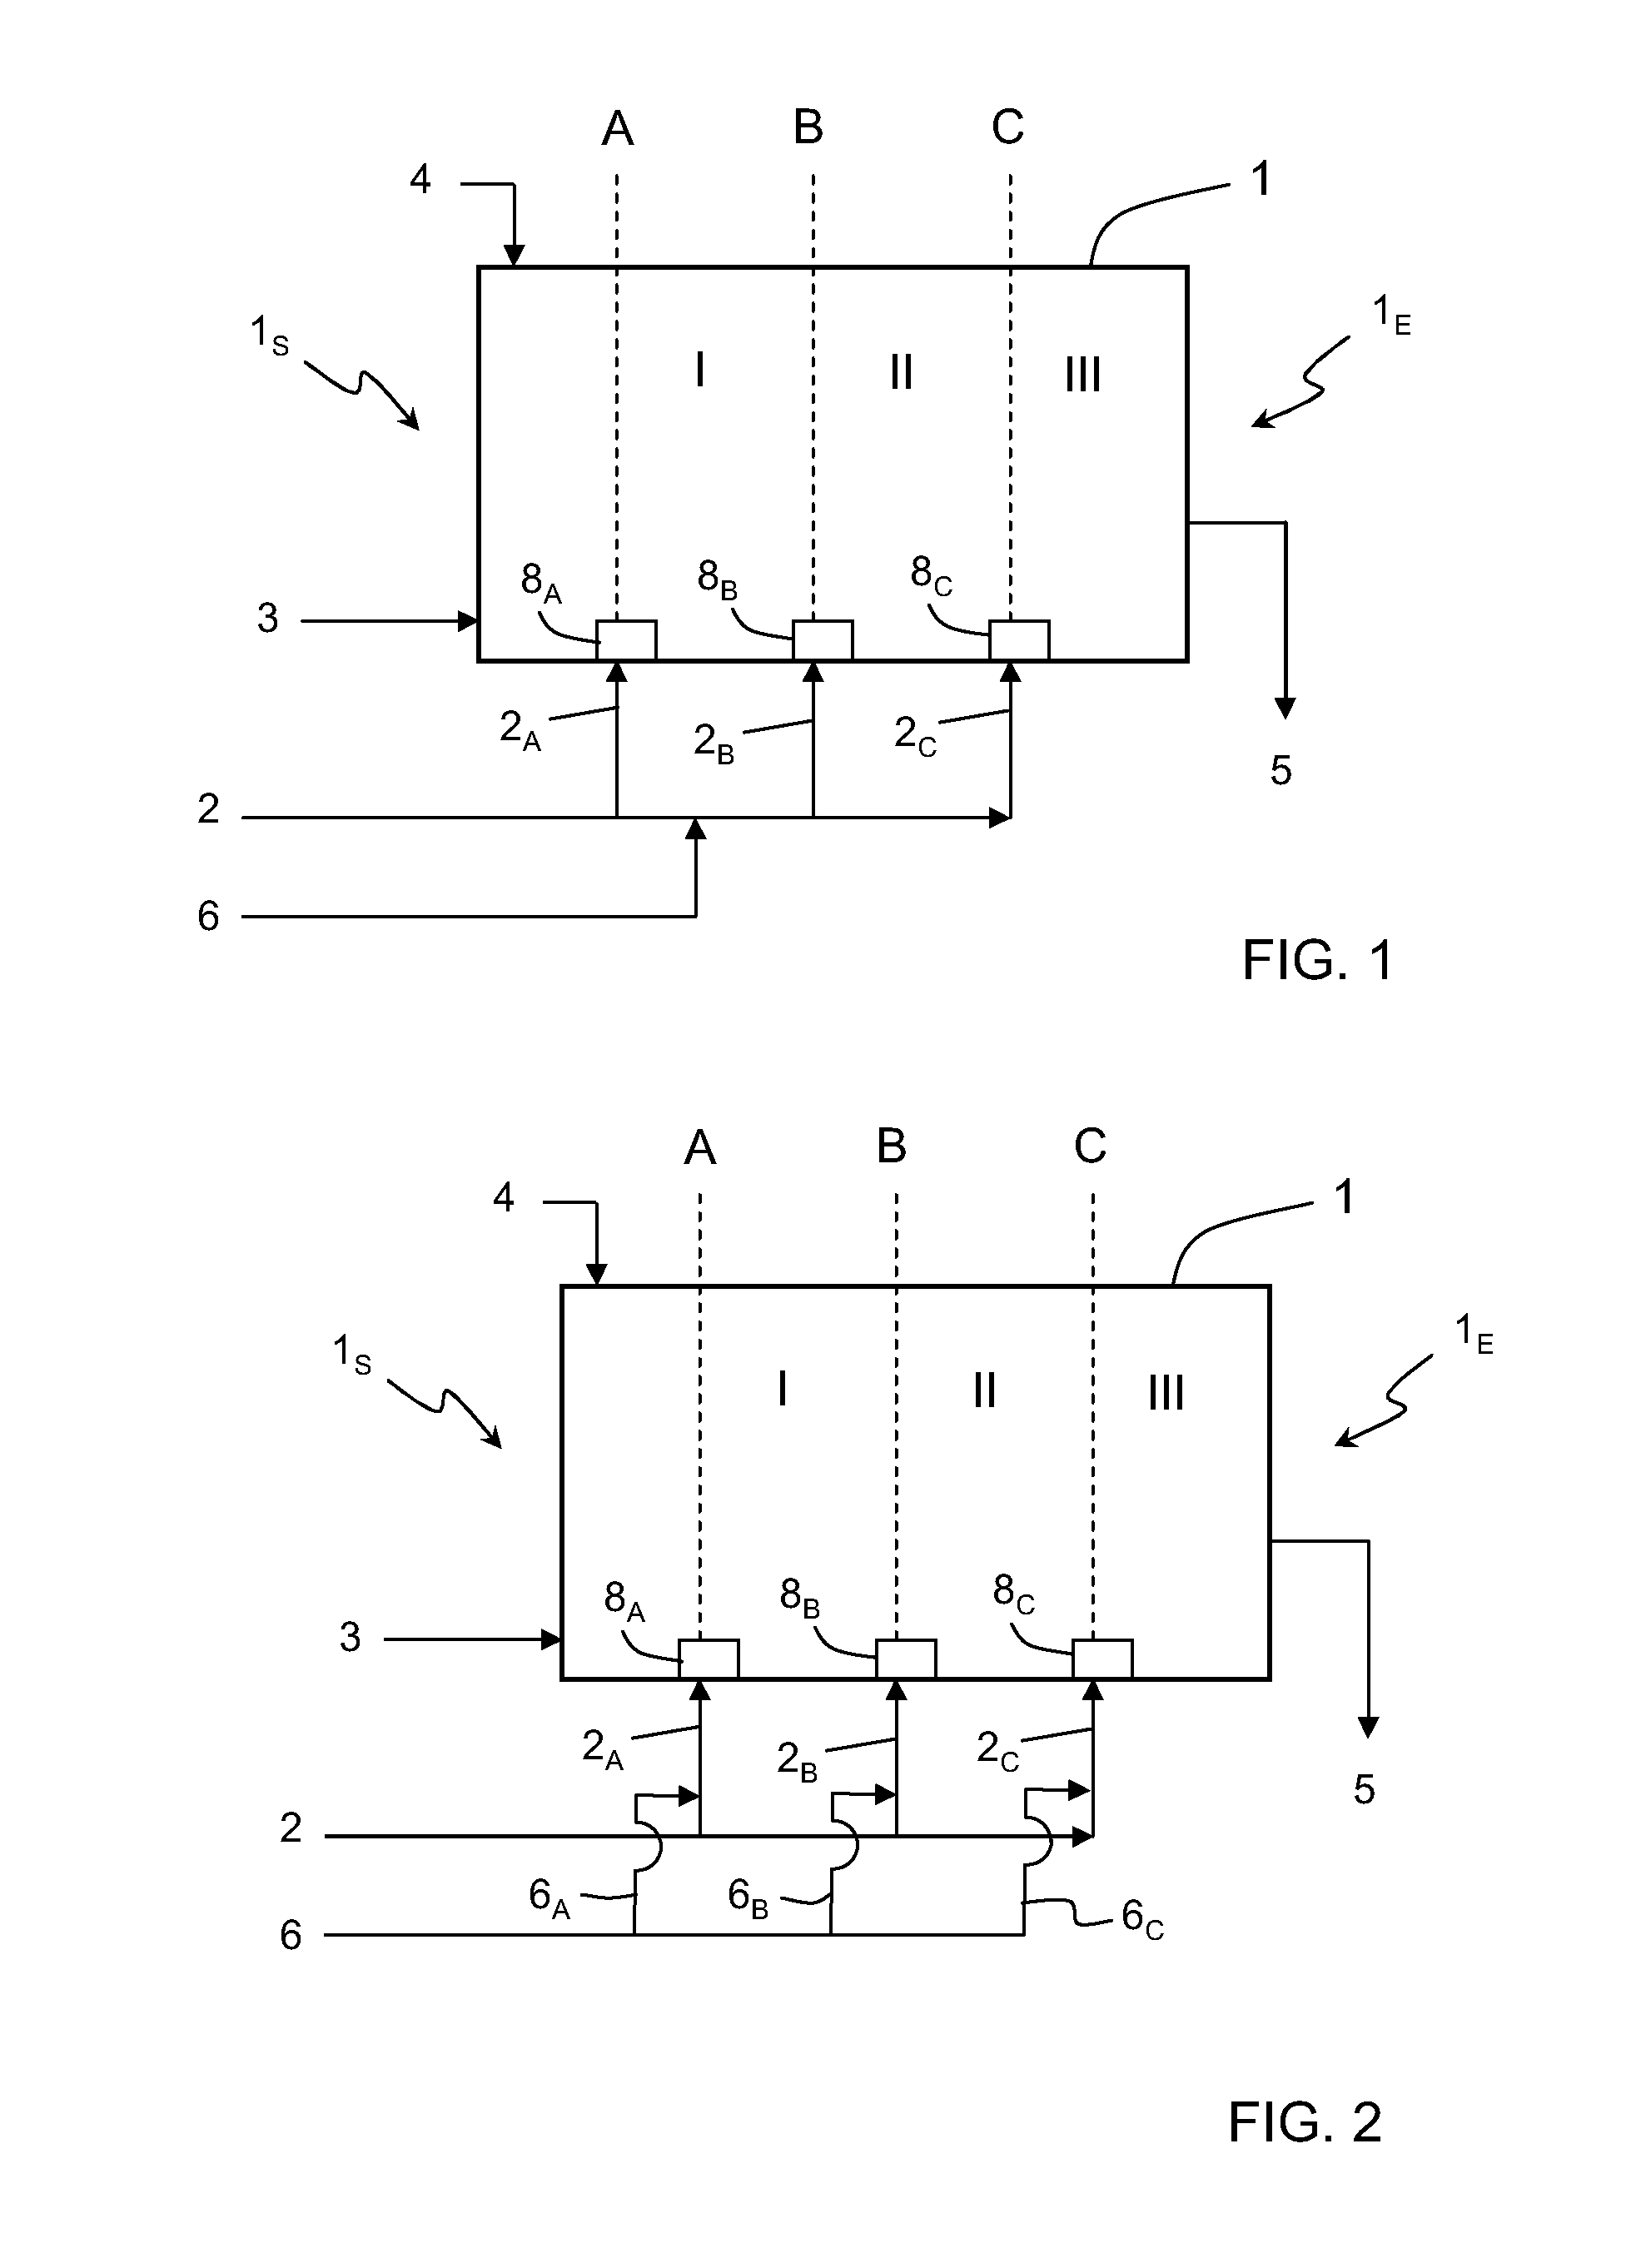 Fluid Bed Granulation of Urea and Related Apparatus